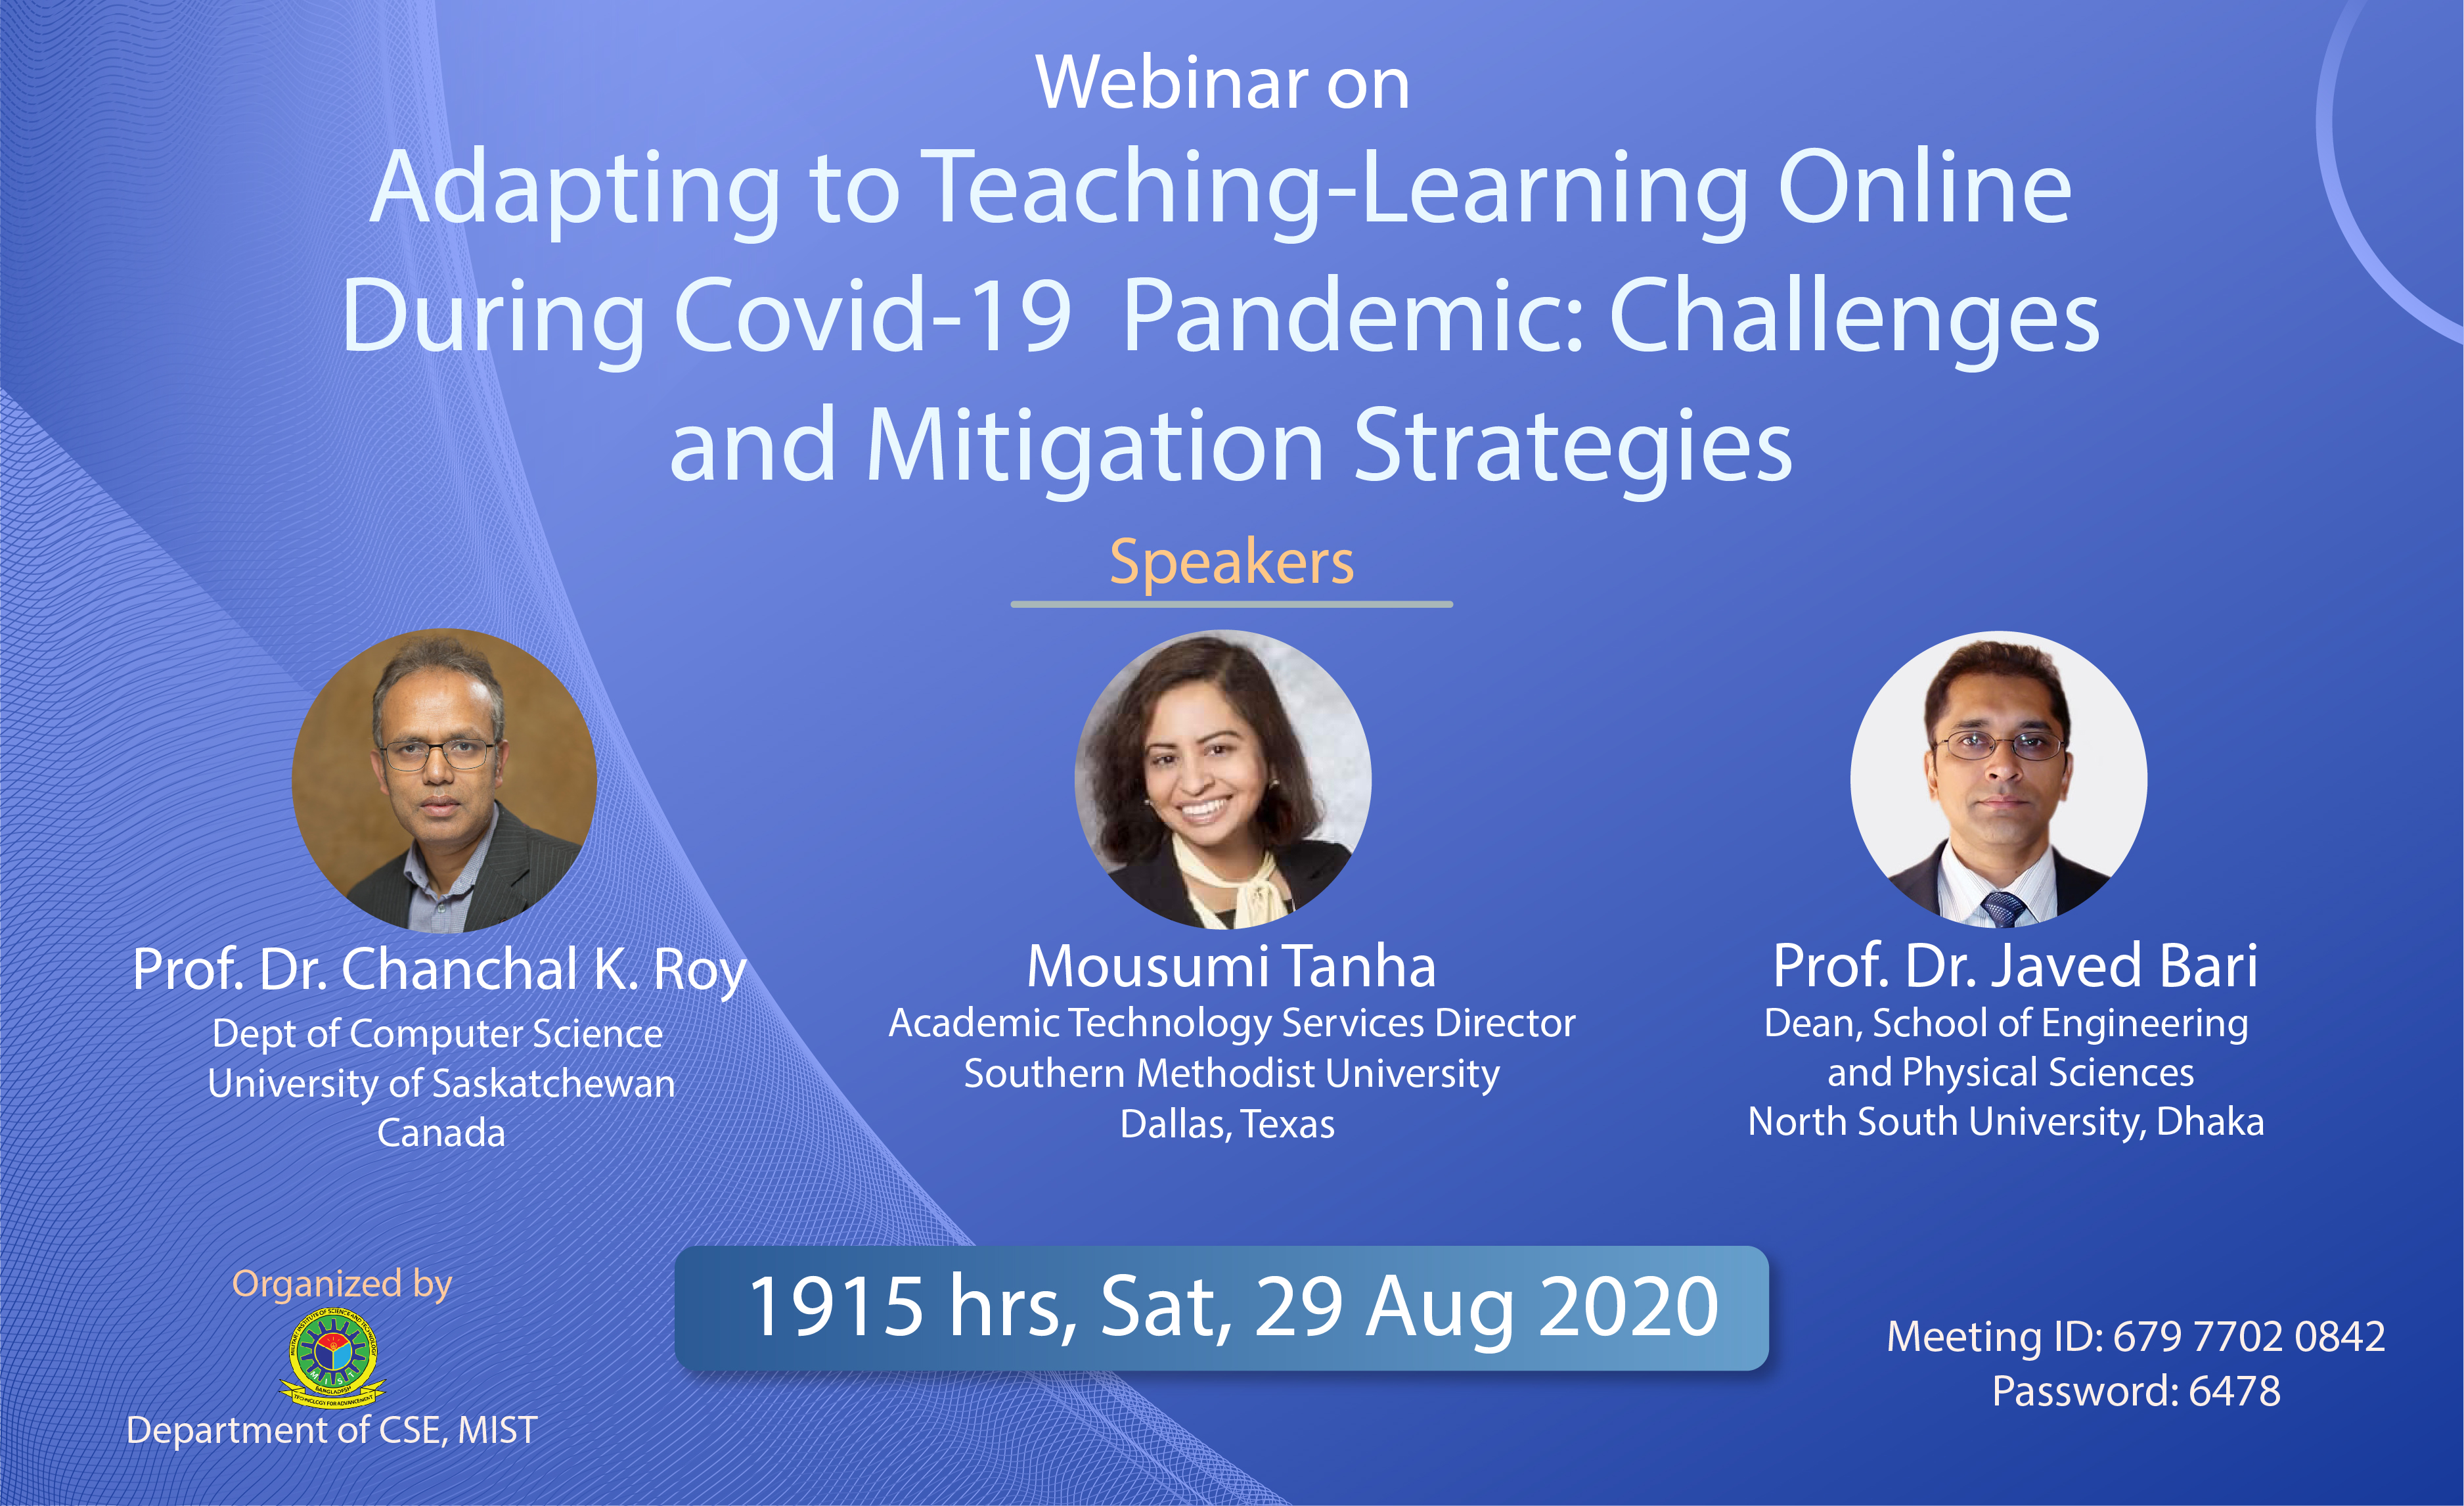 Webinar on Adapting to Online Teaching-Learning by Dept of CSE